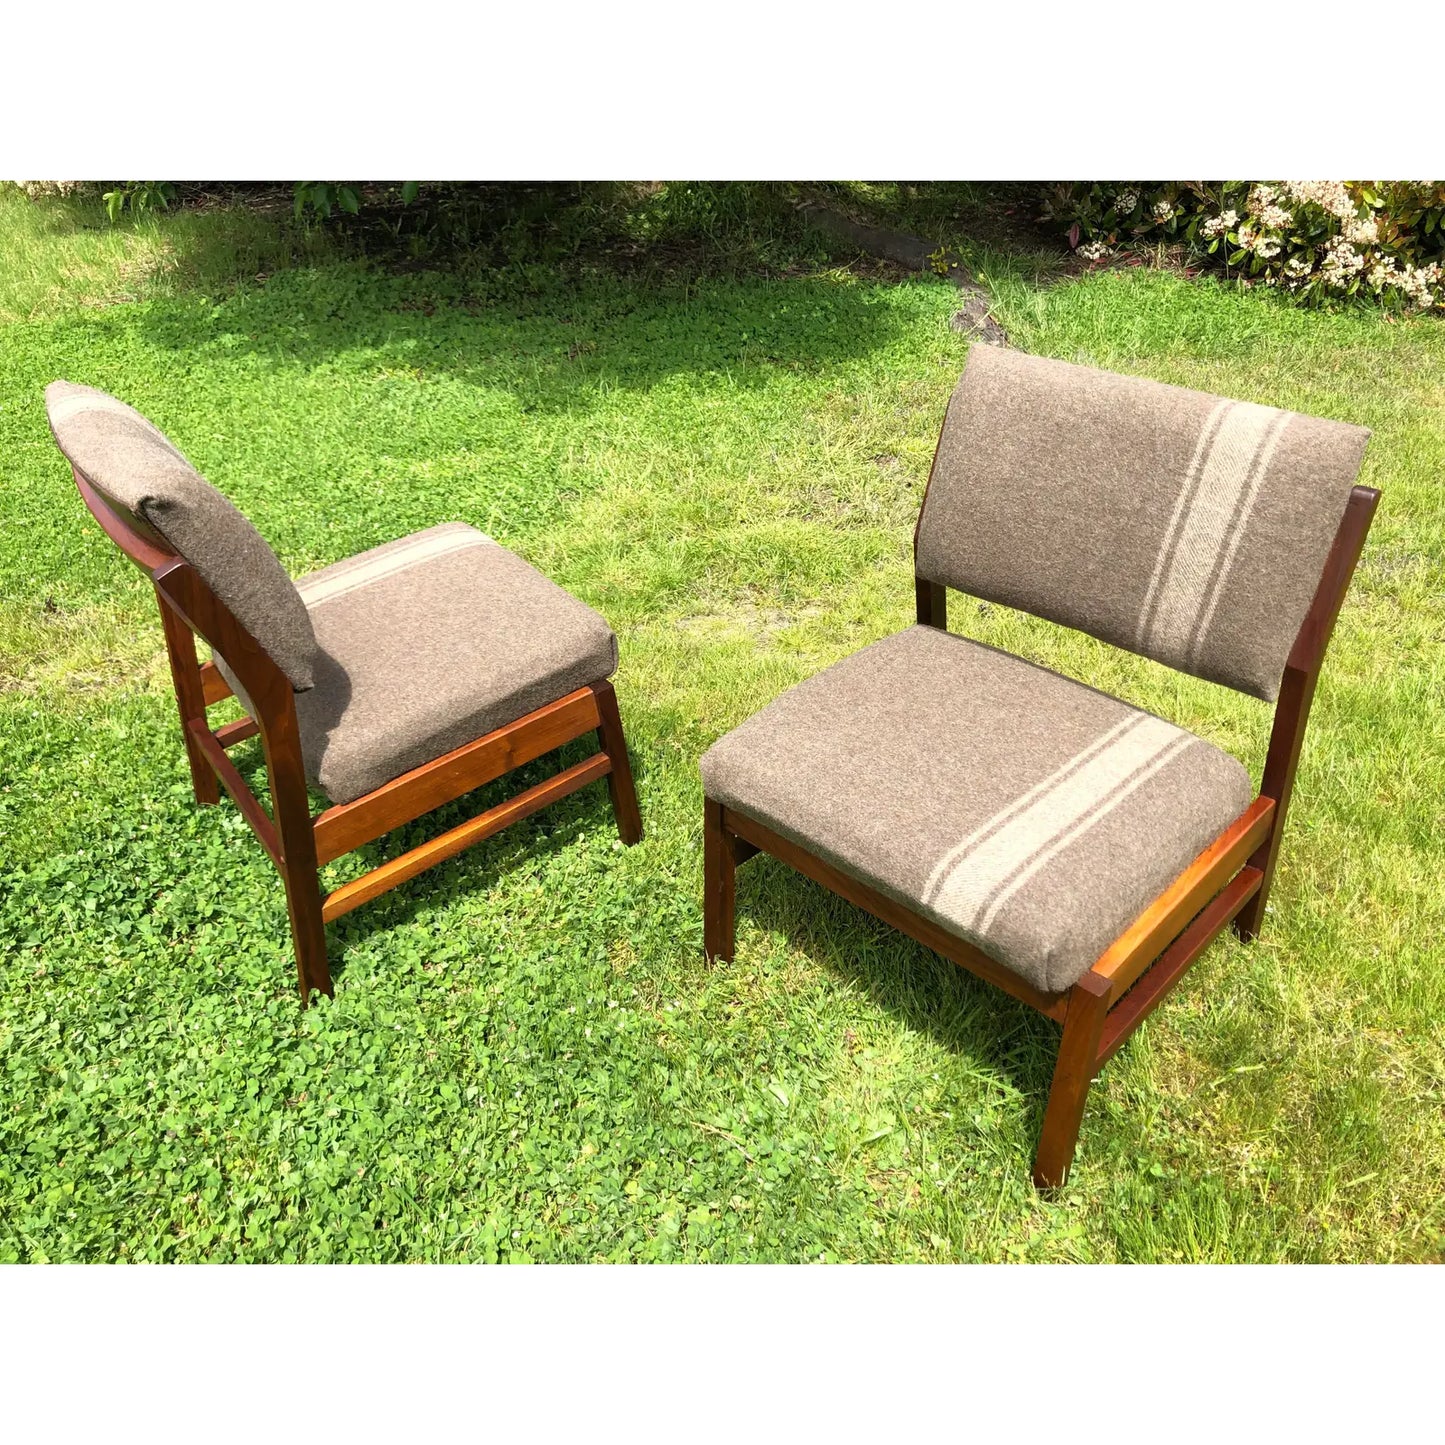 Mid-Century Modern Solid Walnut Lounge Chairs - 2 Pieces